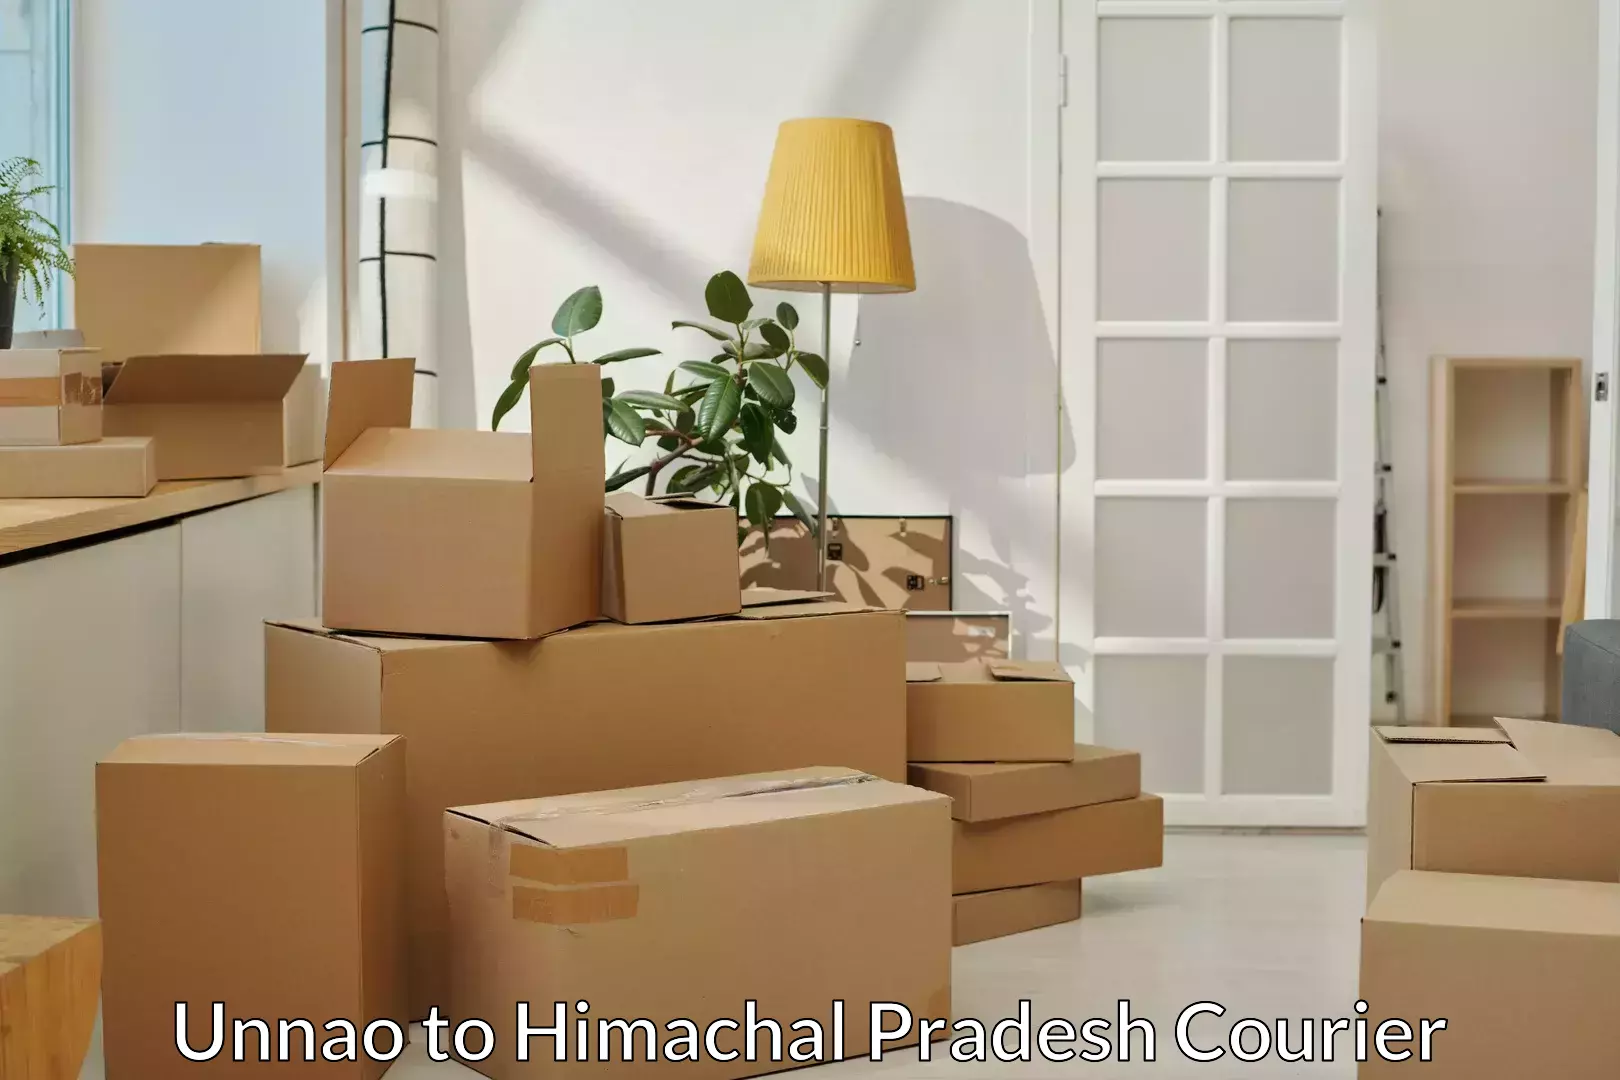 Furniture transport specialists Unnao to Himachal Pradesh